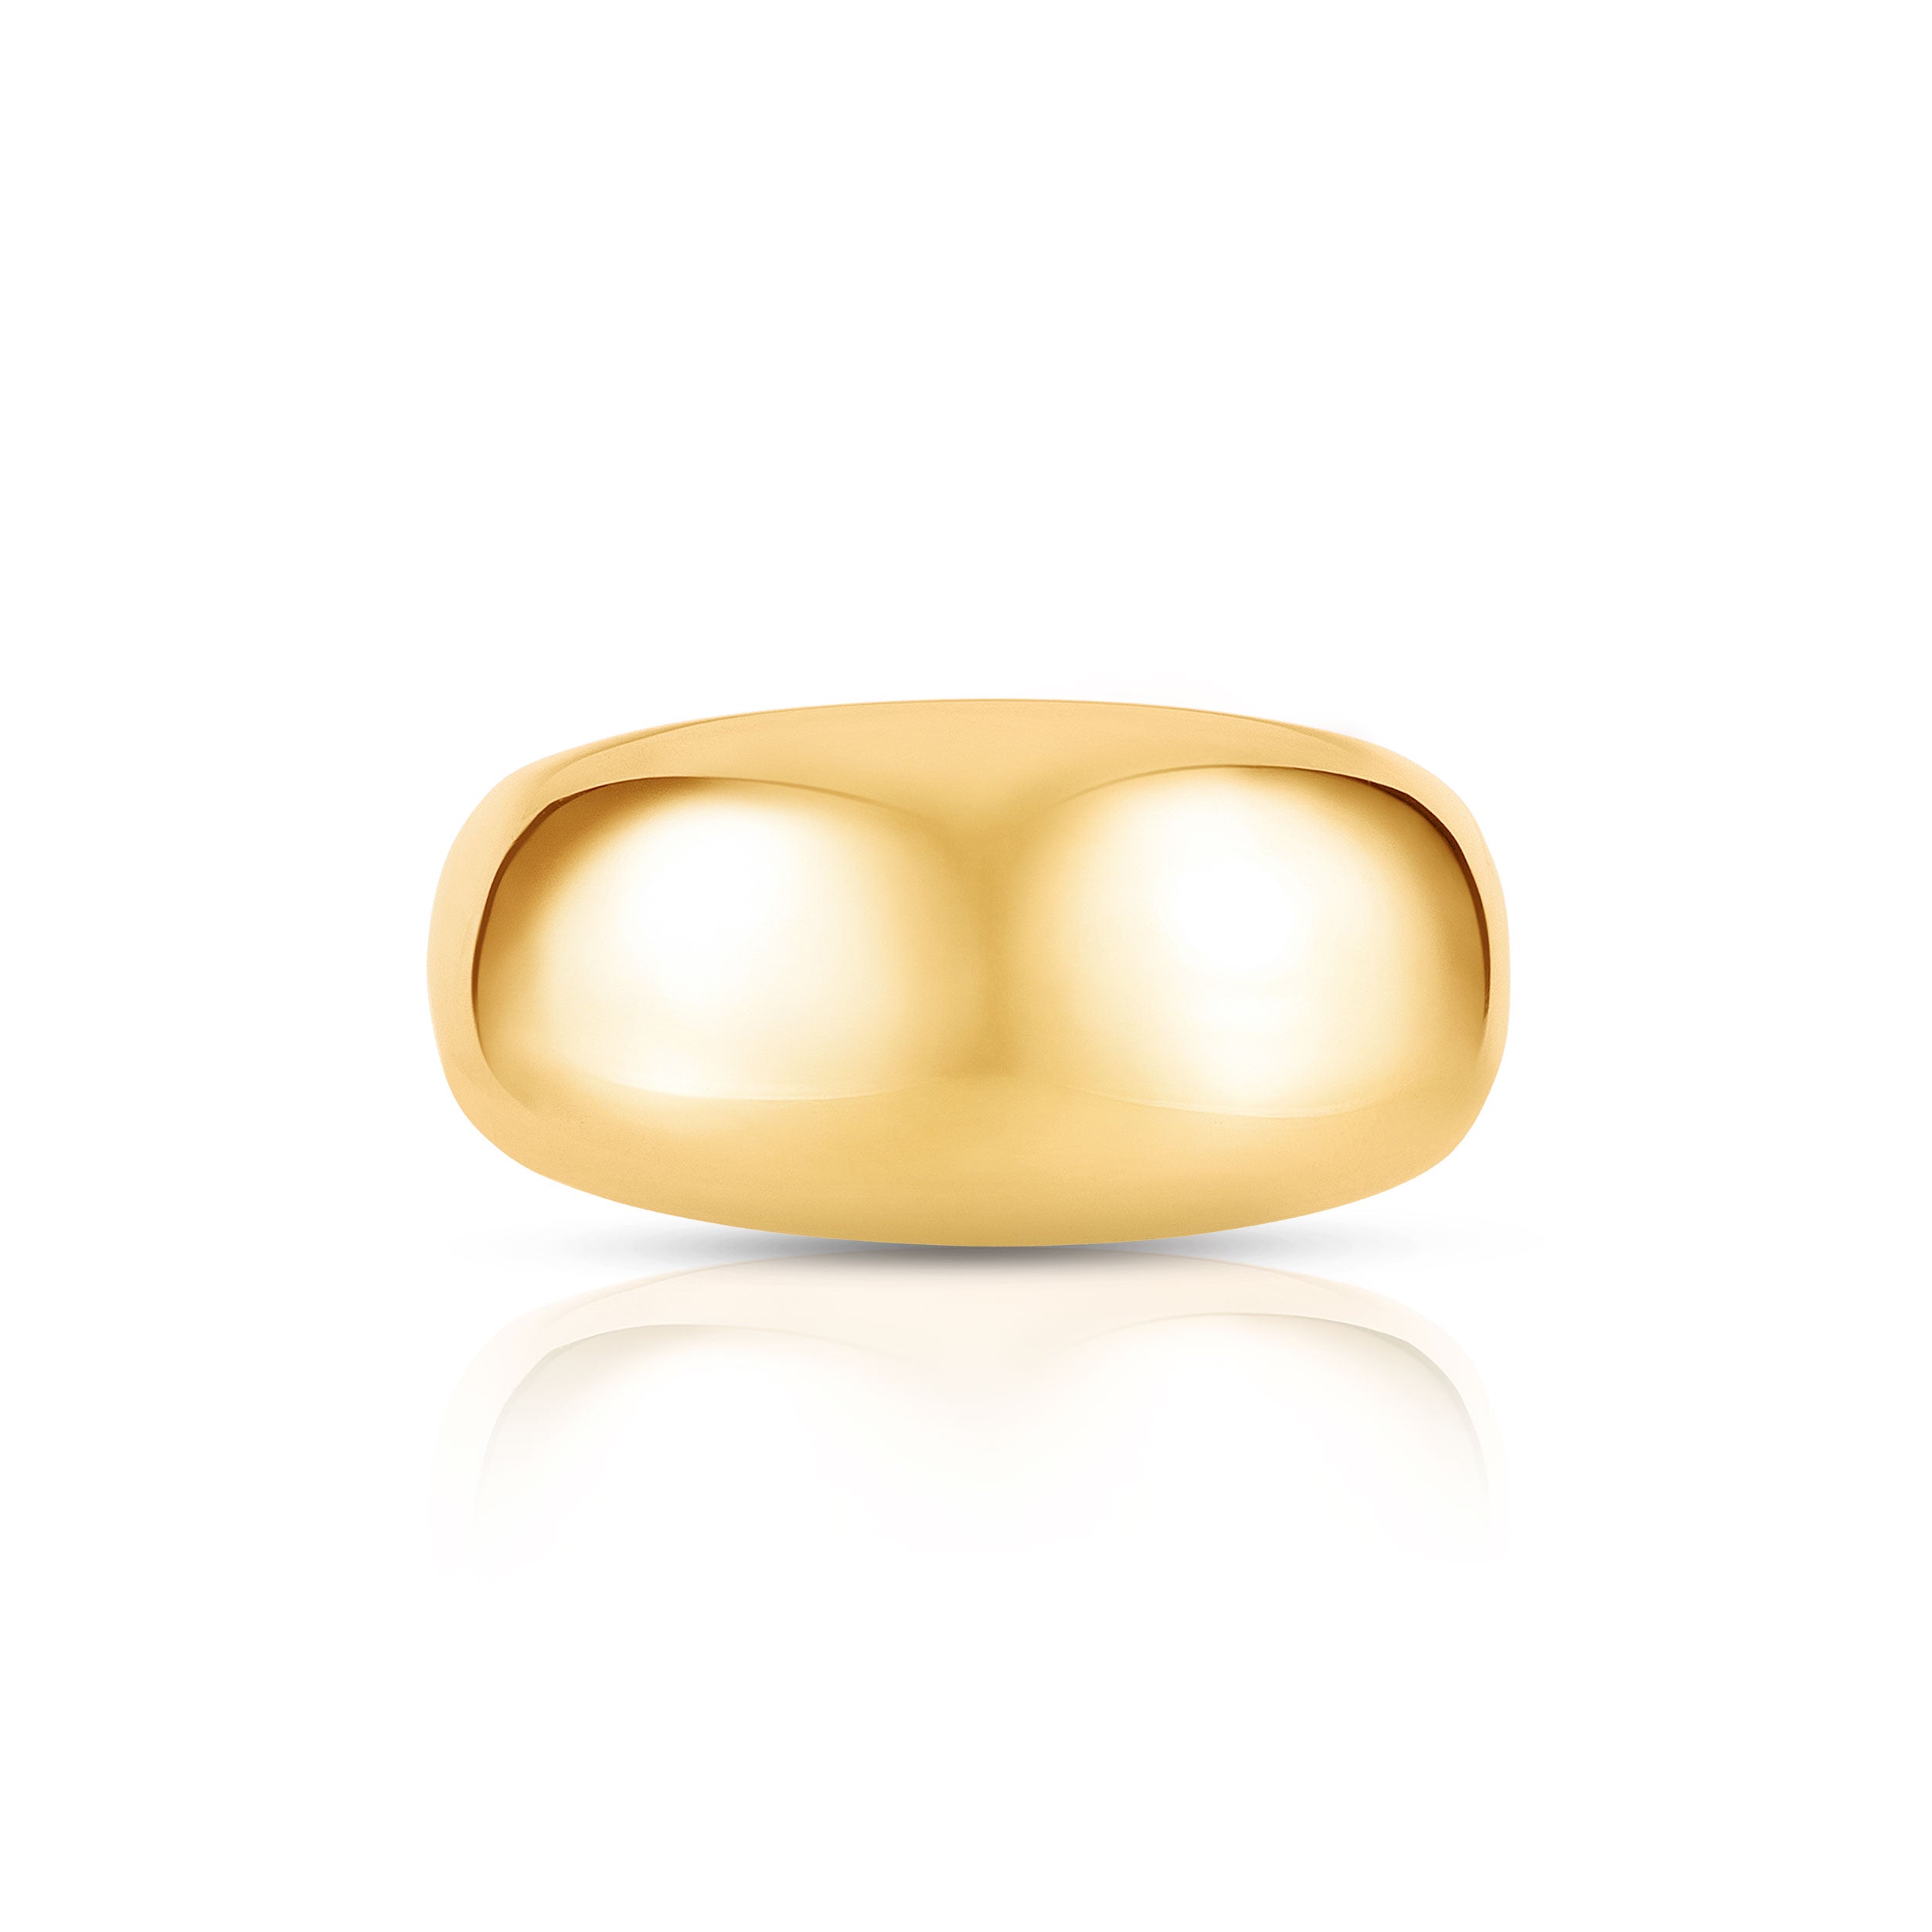 Soap Bubble Pearl Ring in 14K Yellow Gold, Size 4 | Catbird